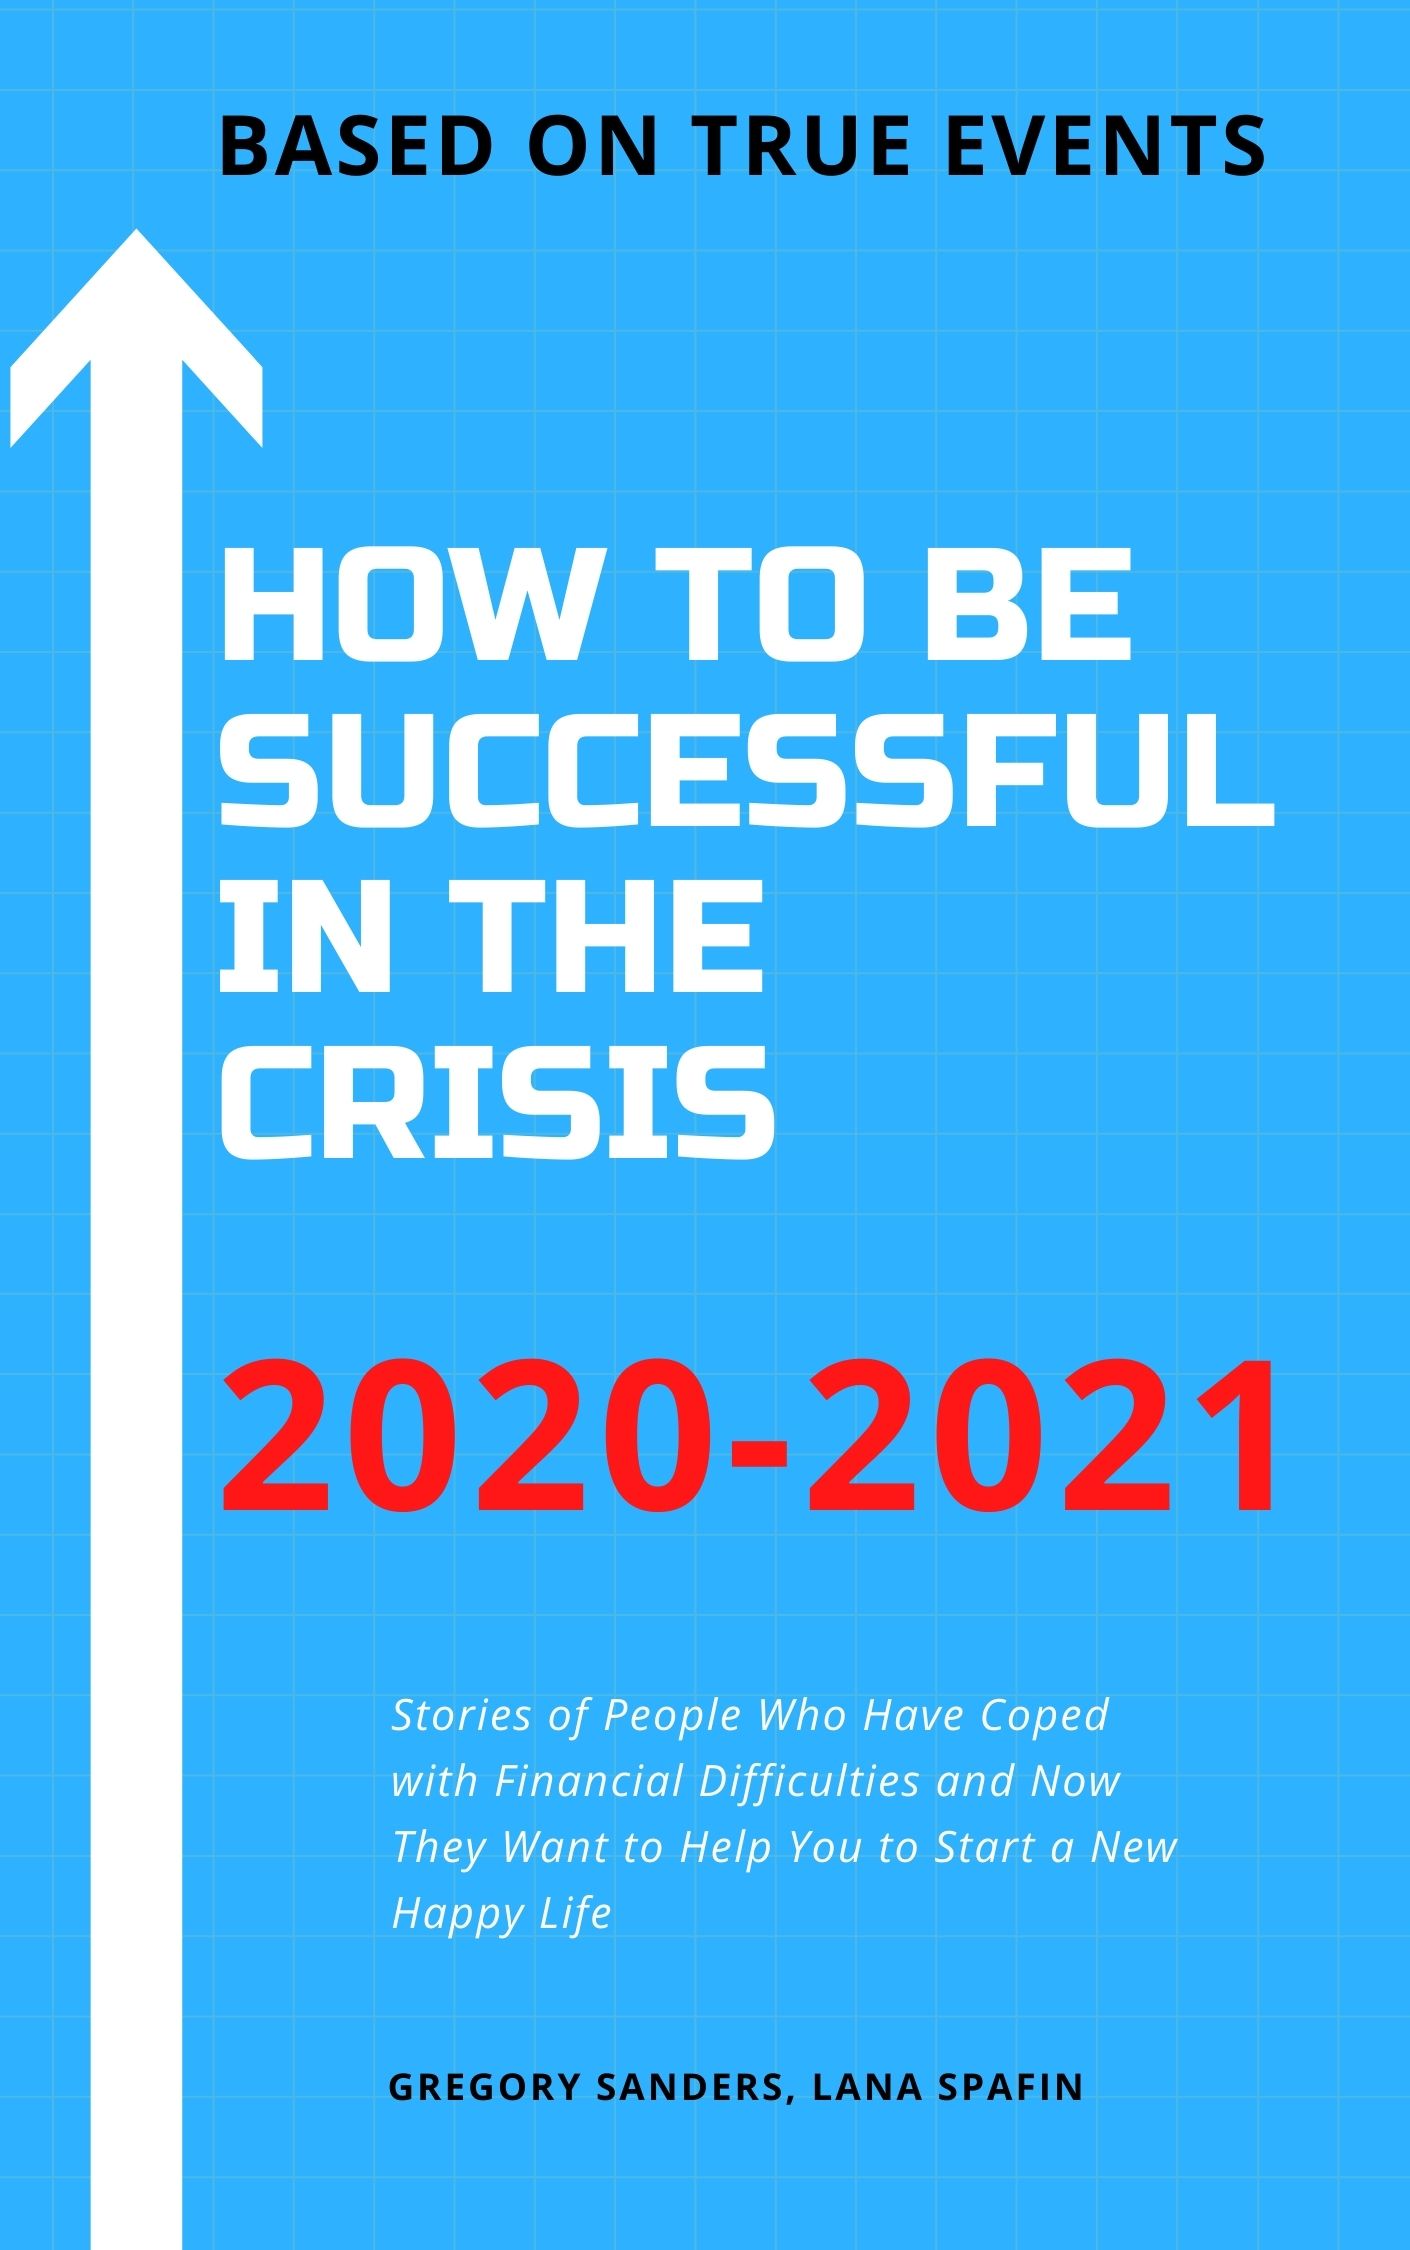 FREE: How to Be Successful in the Crisis 2020-2021. Based on True Events by Gregory Sanders, Lana Spafin